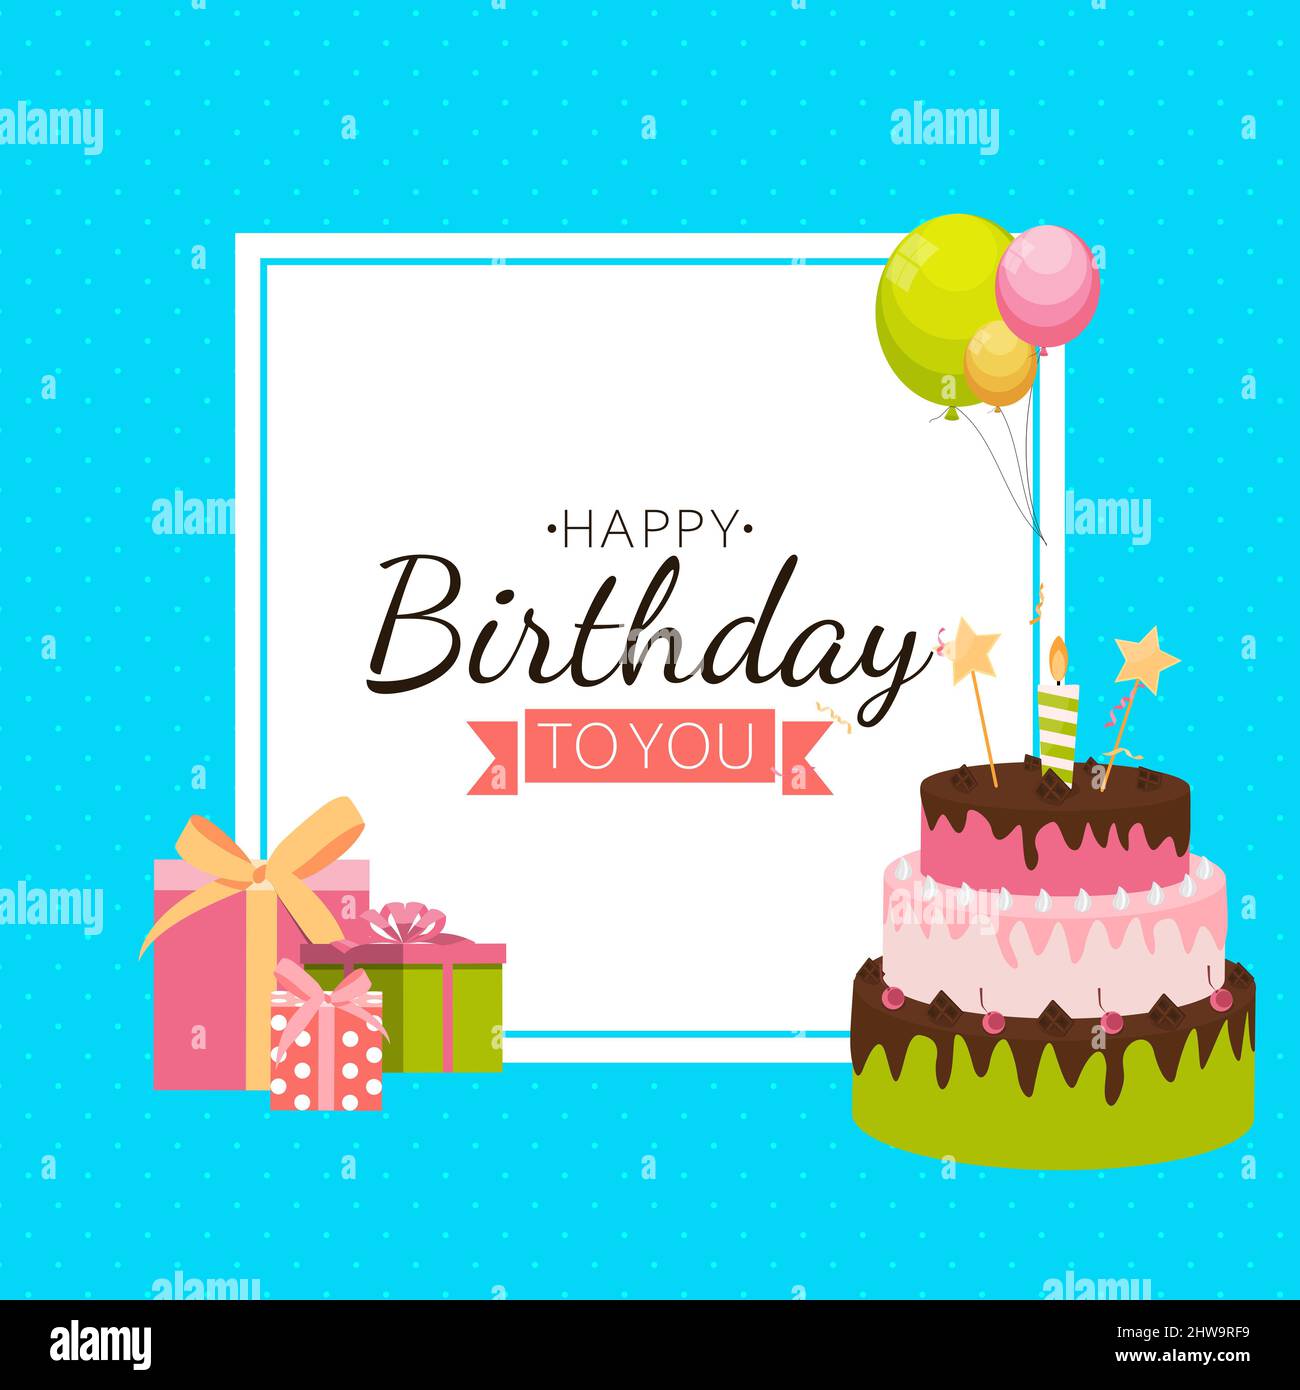 Cute Happy Birthday Background with Gift Box, Cake and Candles. Design ...